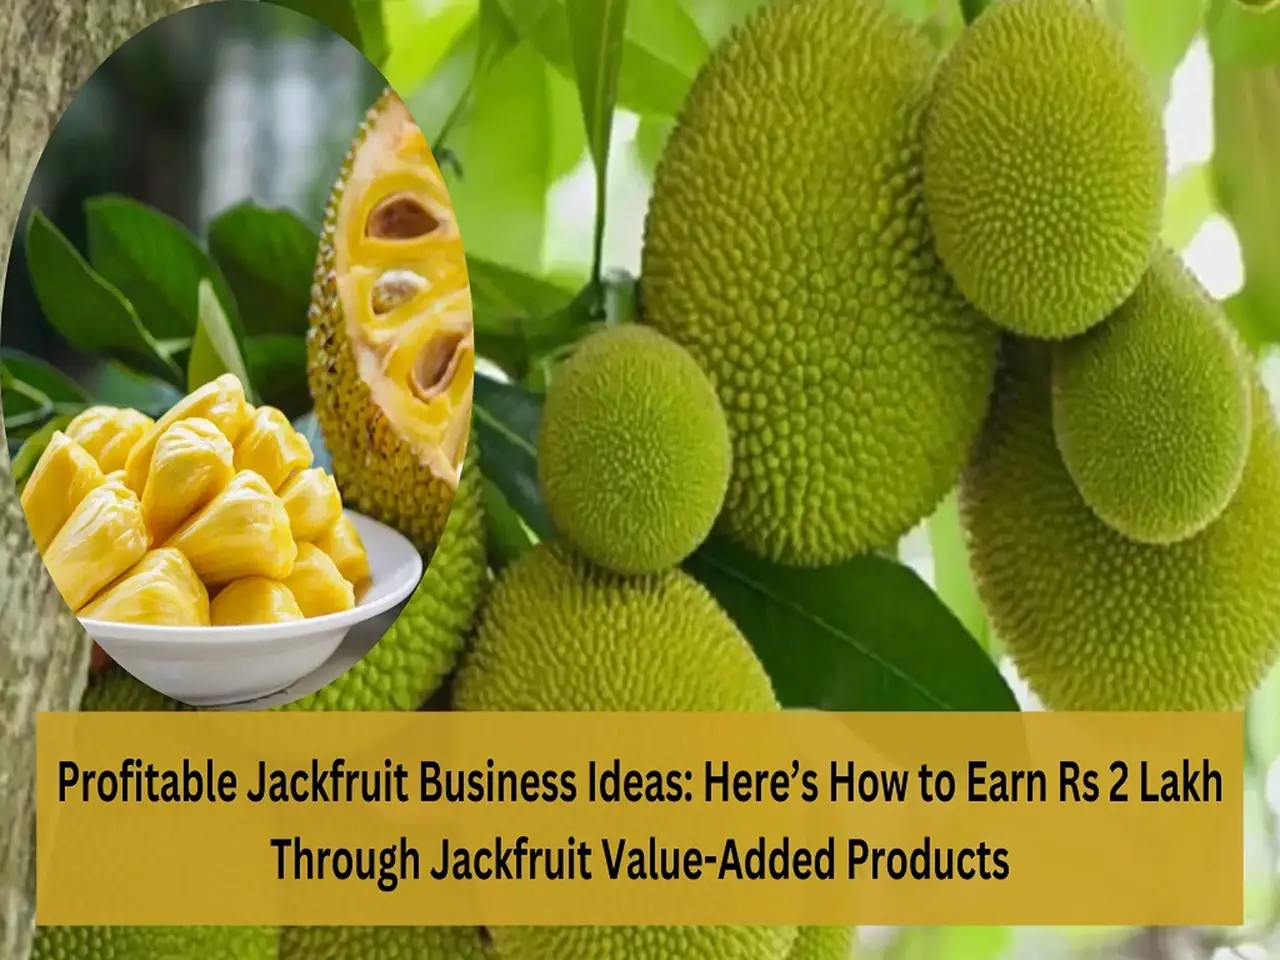 Here’s How to Earn Rs 2 Lakh Through Jackfruit Value-Added Products